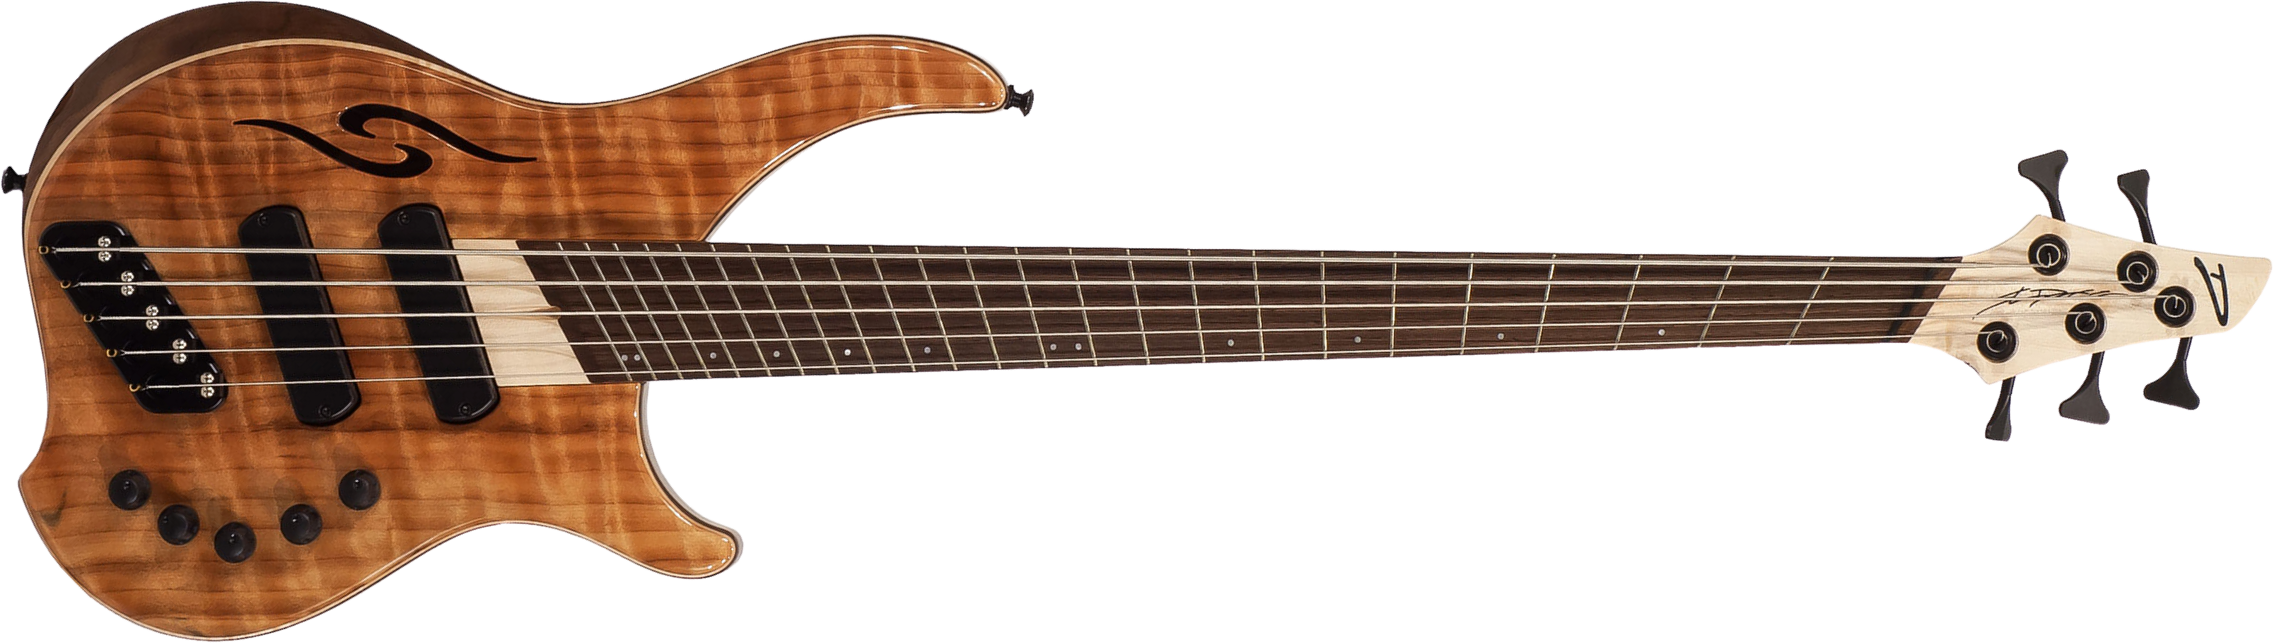 Dingwall Afterburner Ii 5 2-pickups Wen +housse - Natural - Solidbody E-bass - Main picture